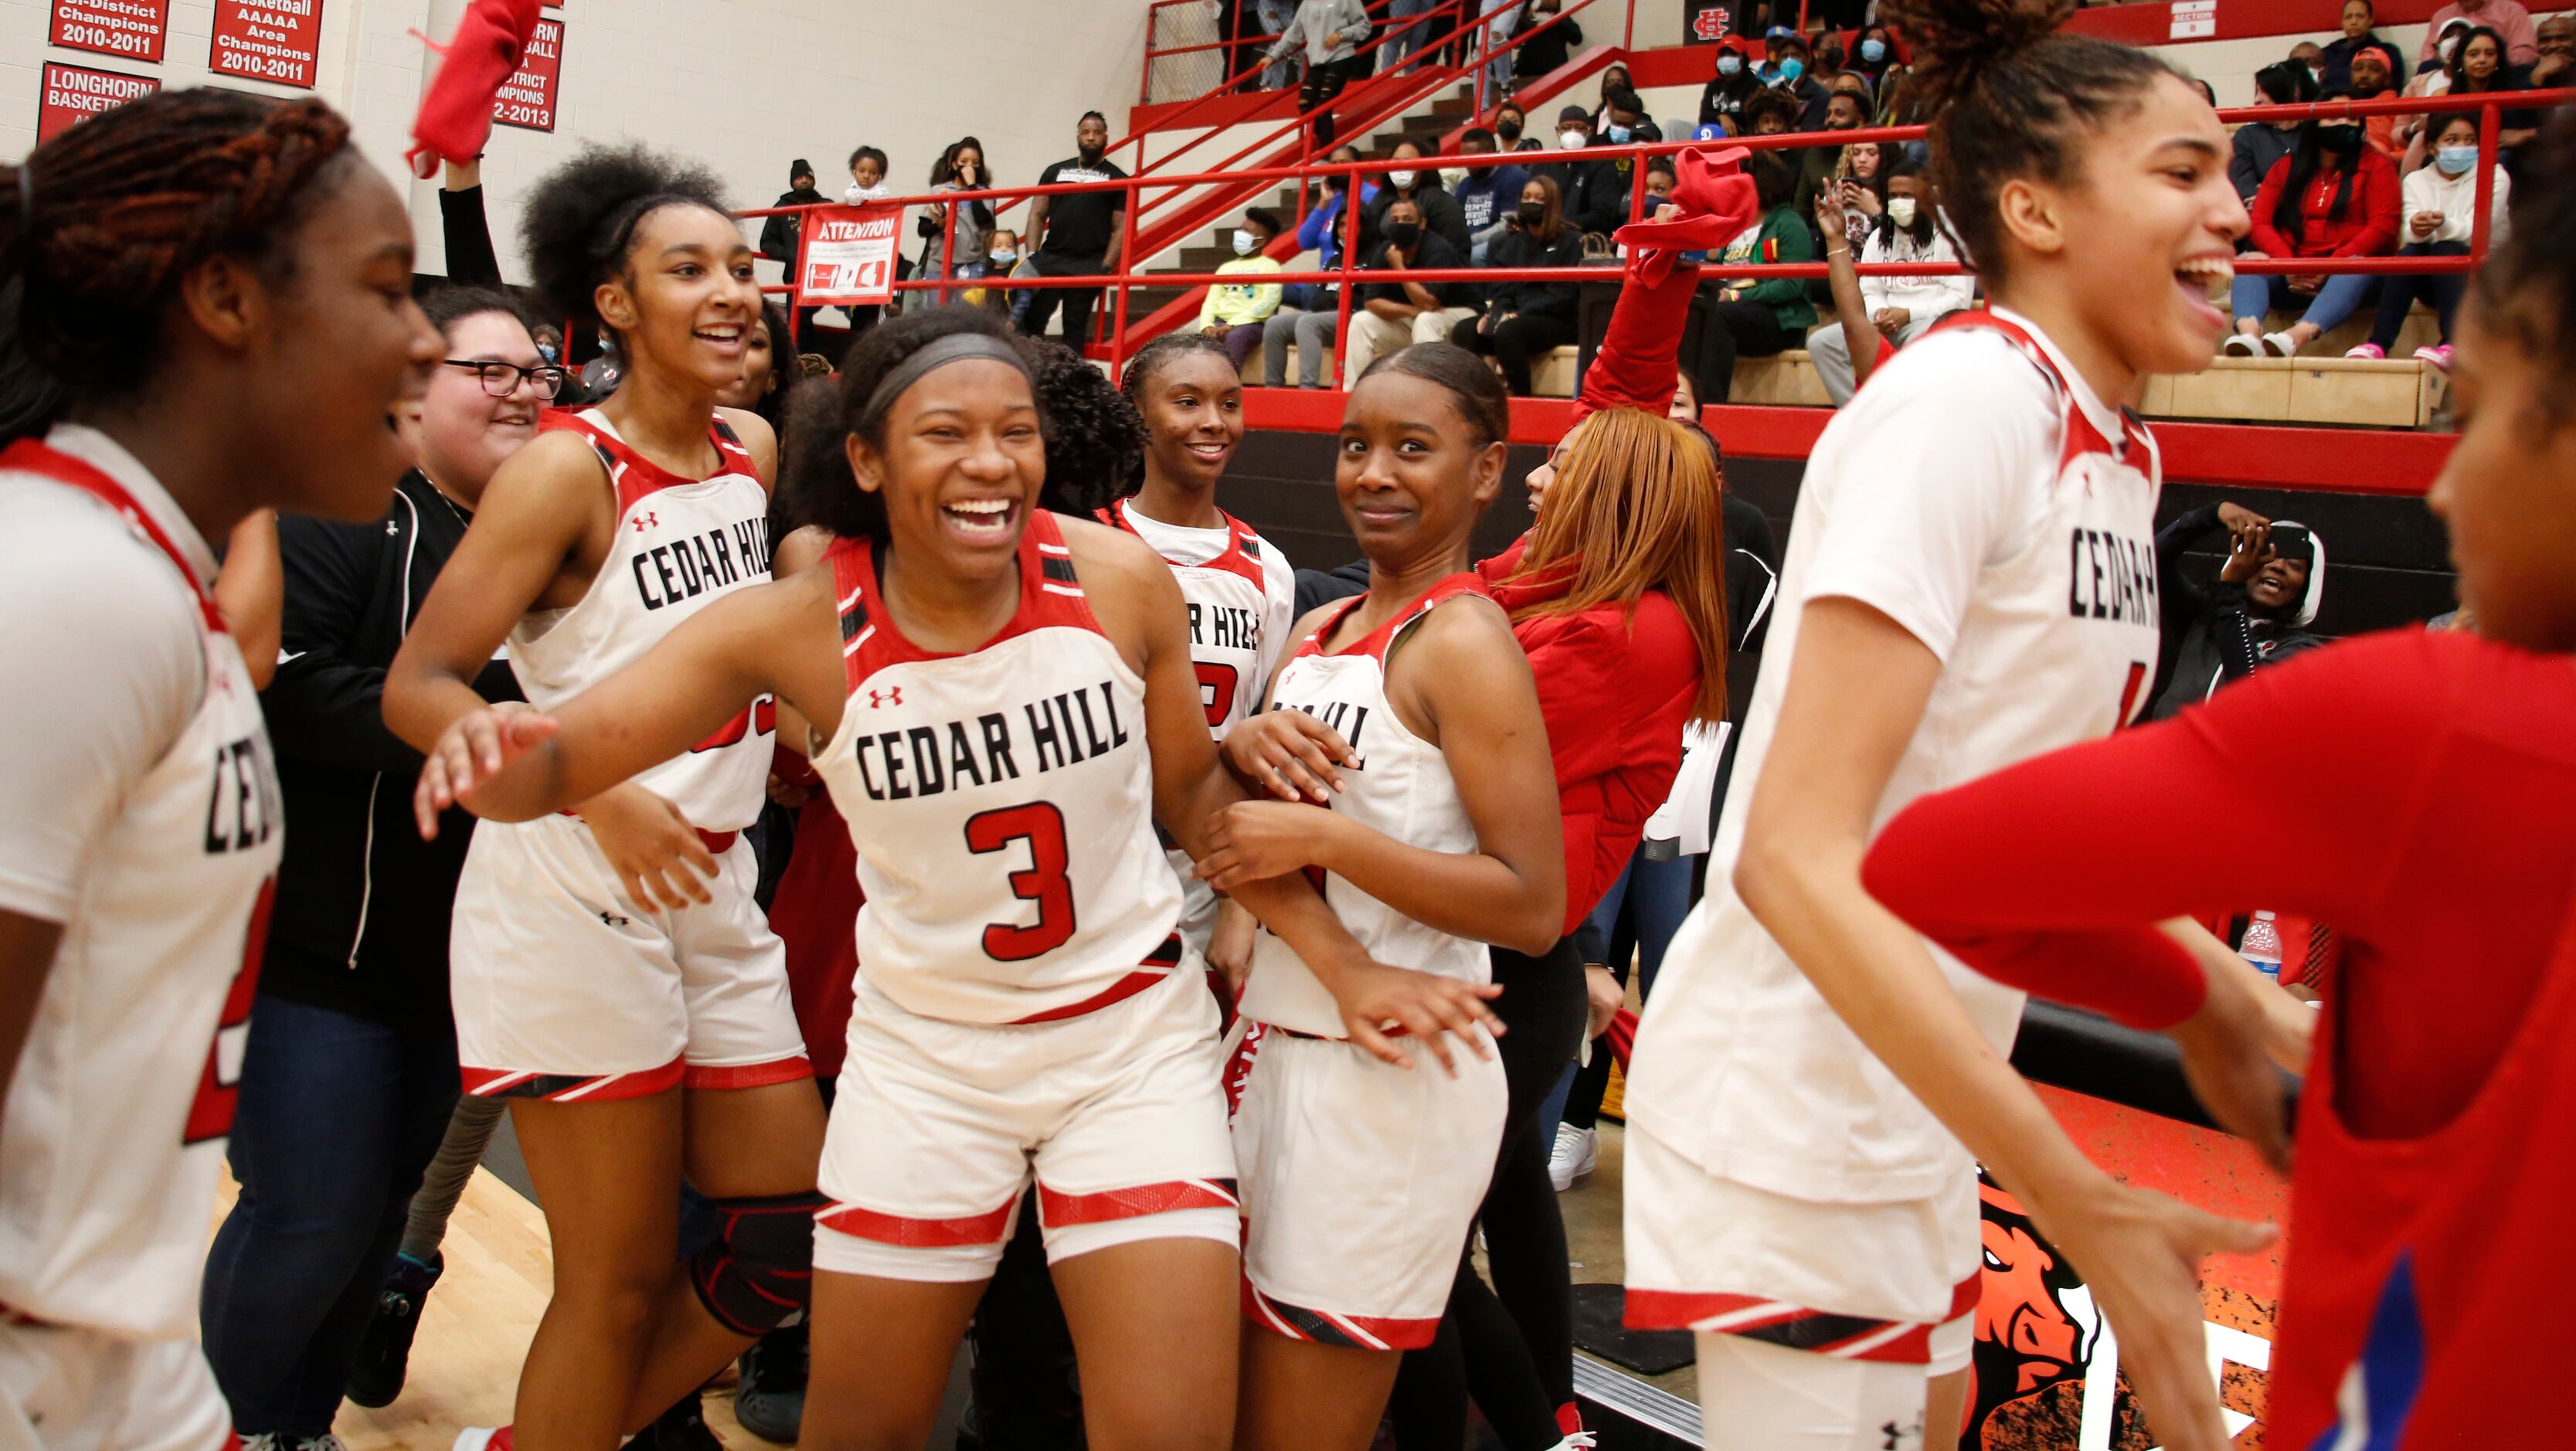 Cedar Hill players celebrate on the court following their 80-72 victory over Duncanville....